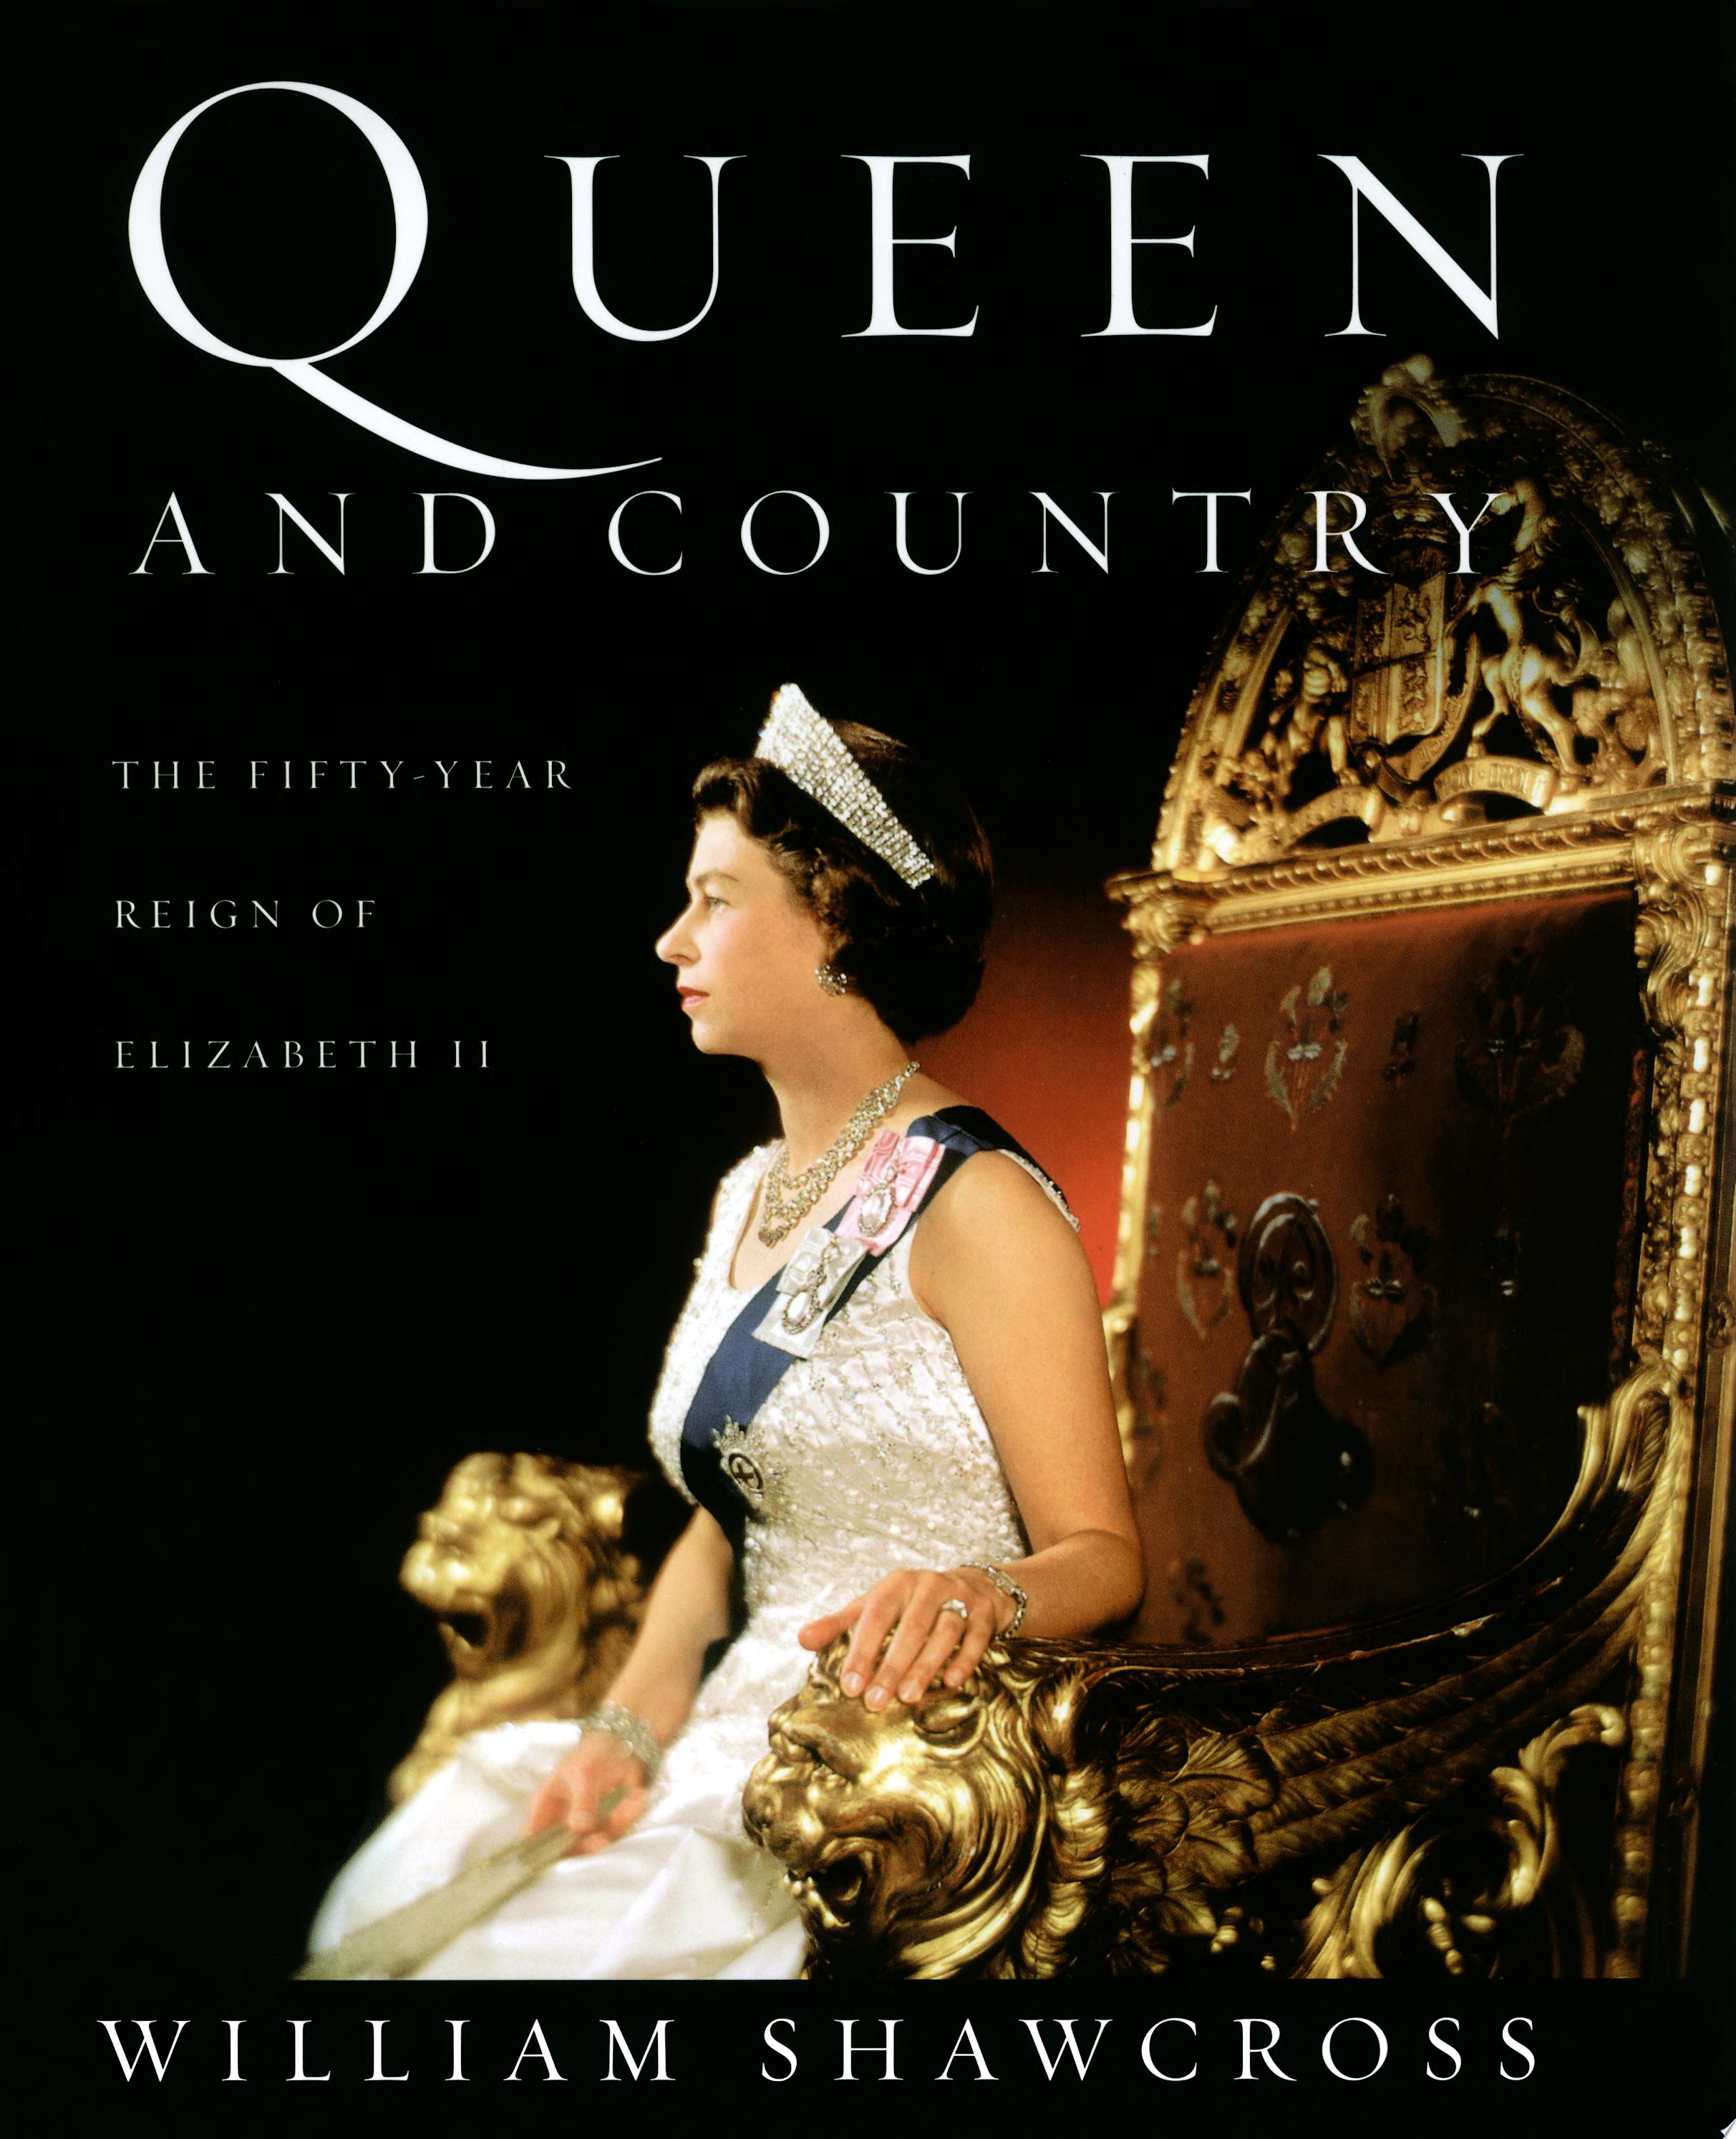 Image for "Queen and Country: the fifty-year reign of Elizabeth II"